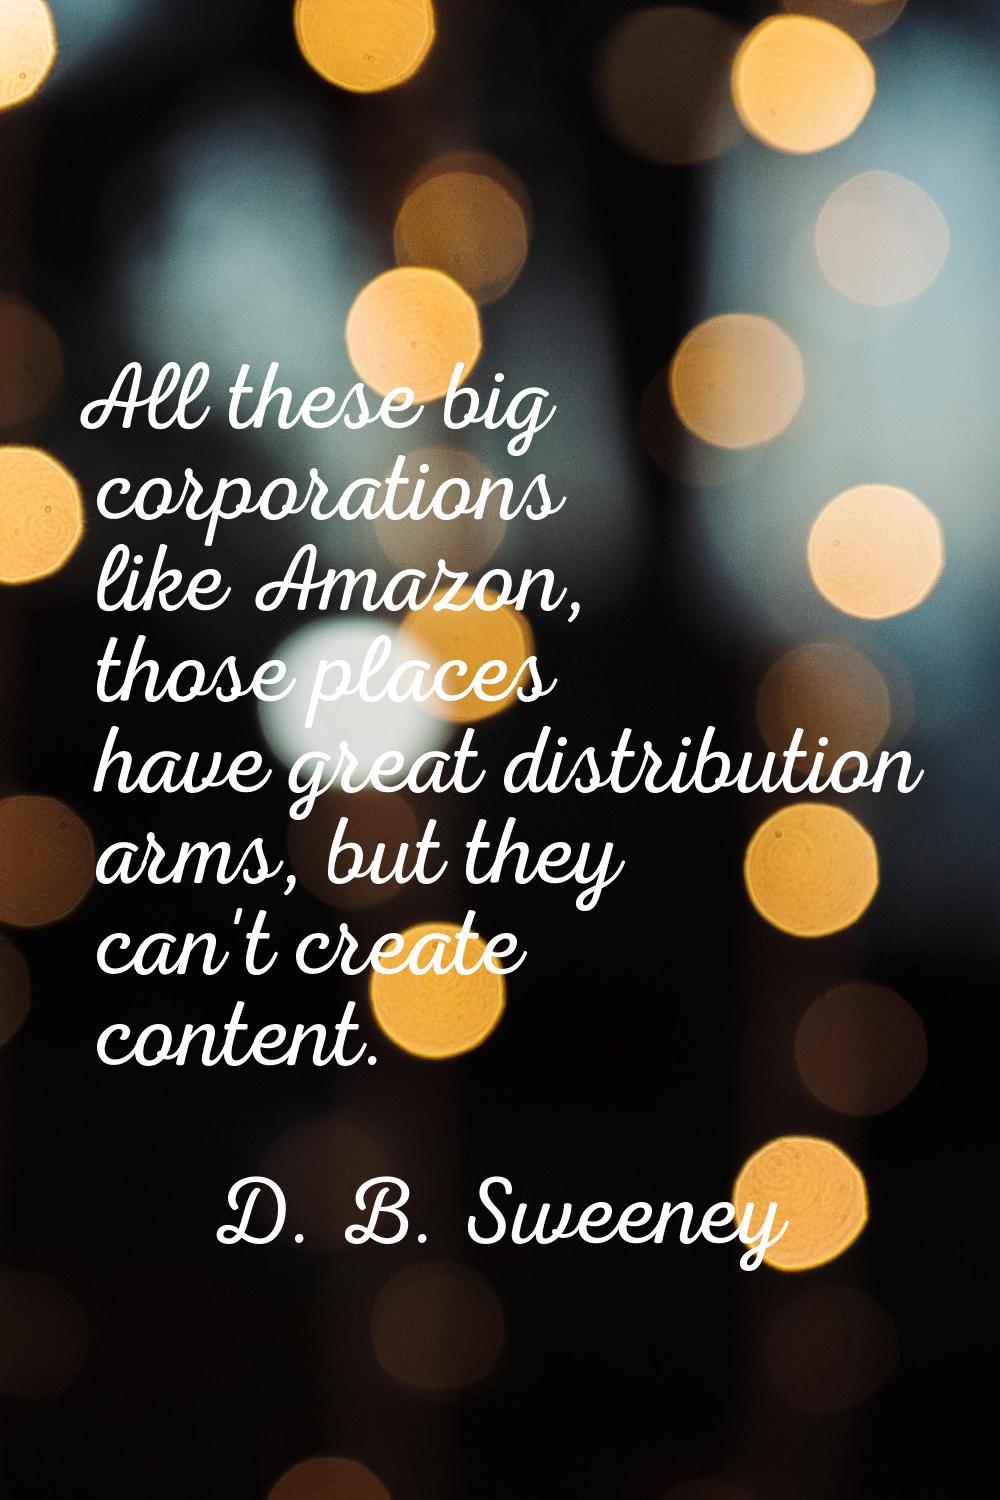 All these big corporations like Amazon, those places have great distribution arms, but they can't c